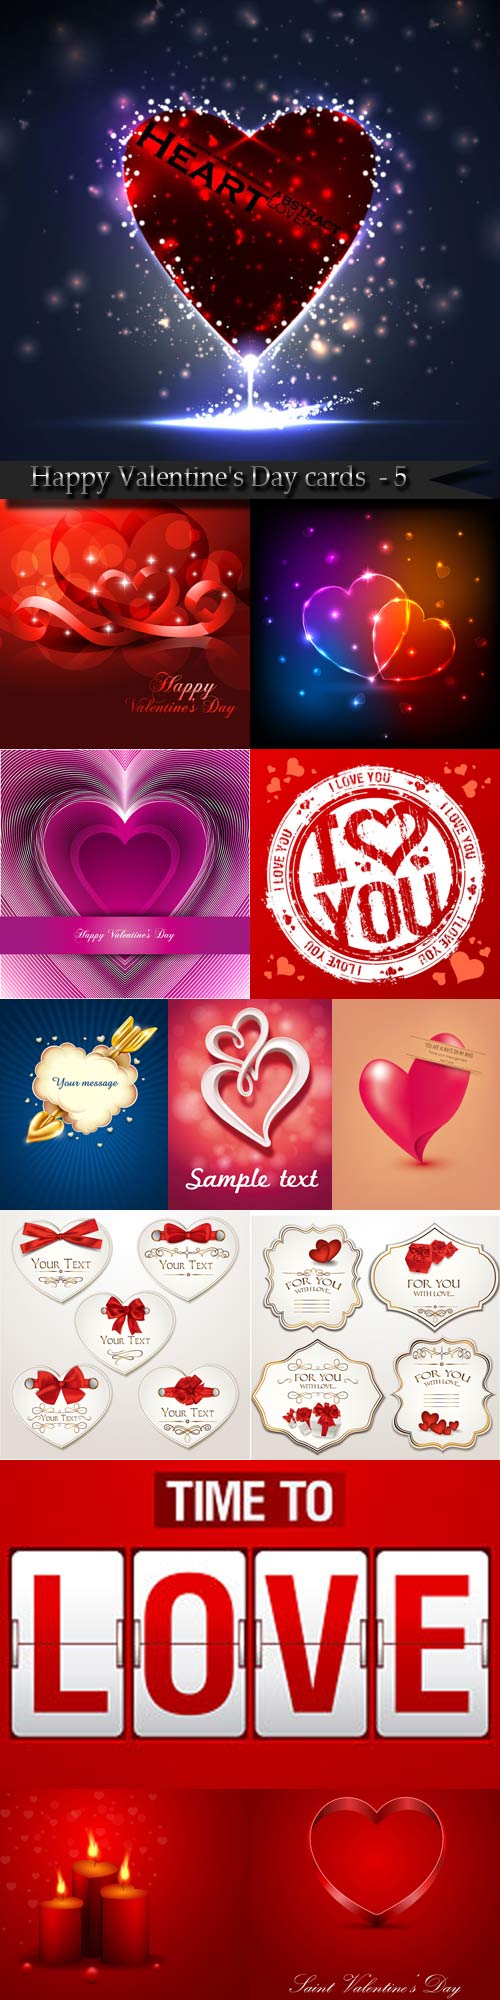 Happy Valentine's Day cards and backgrounds - 5